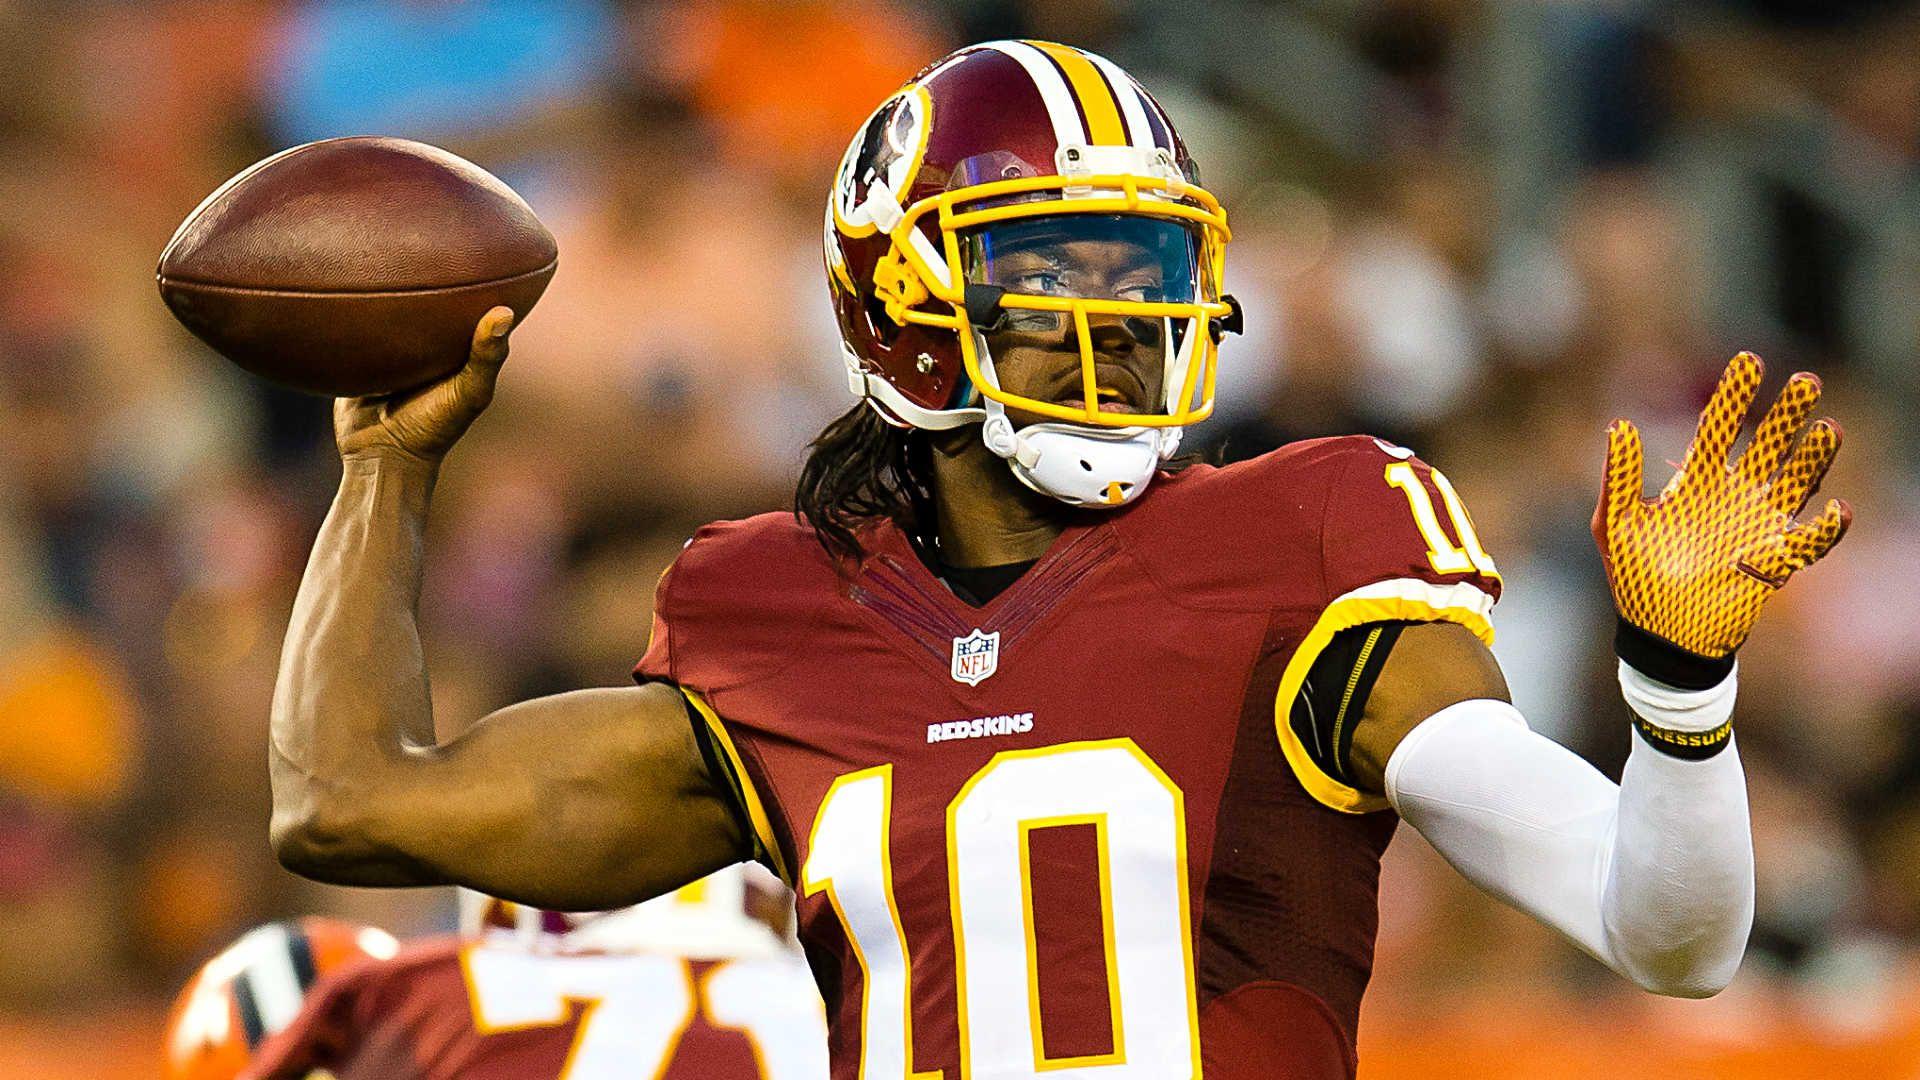 NFL coach says Redskins' 'lack of respect' for RGIII 'looks